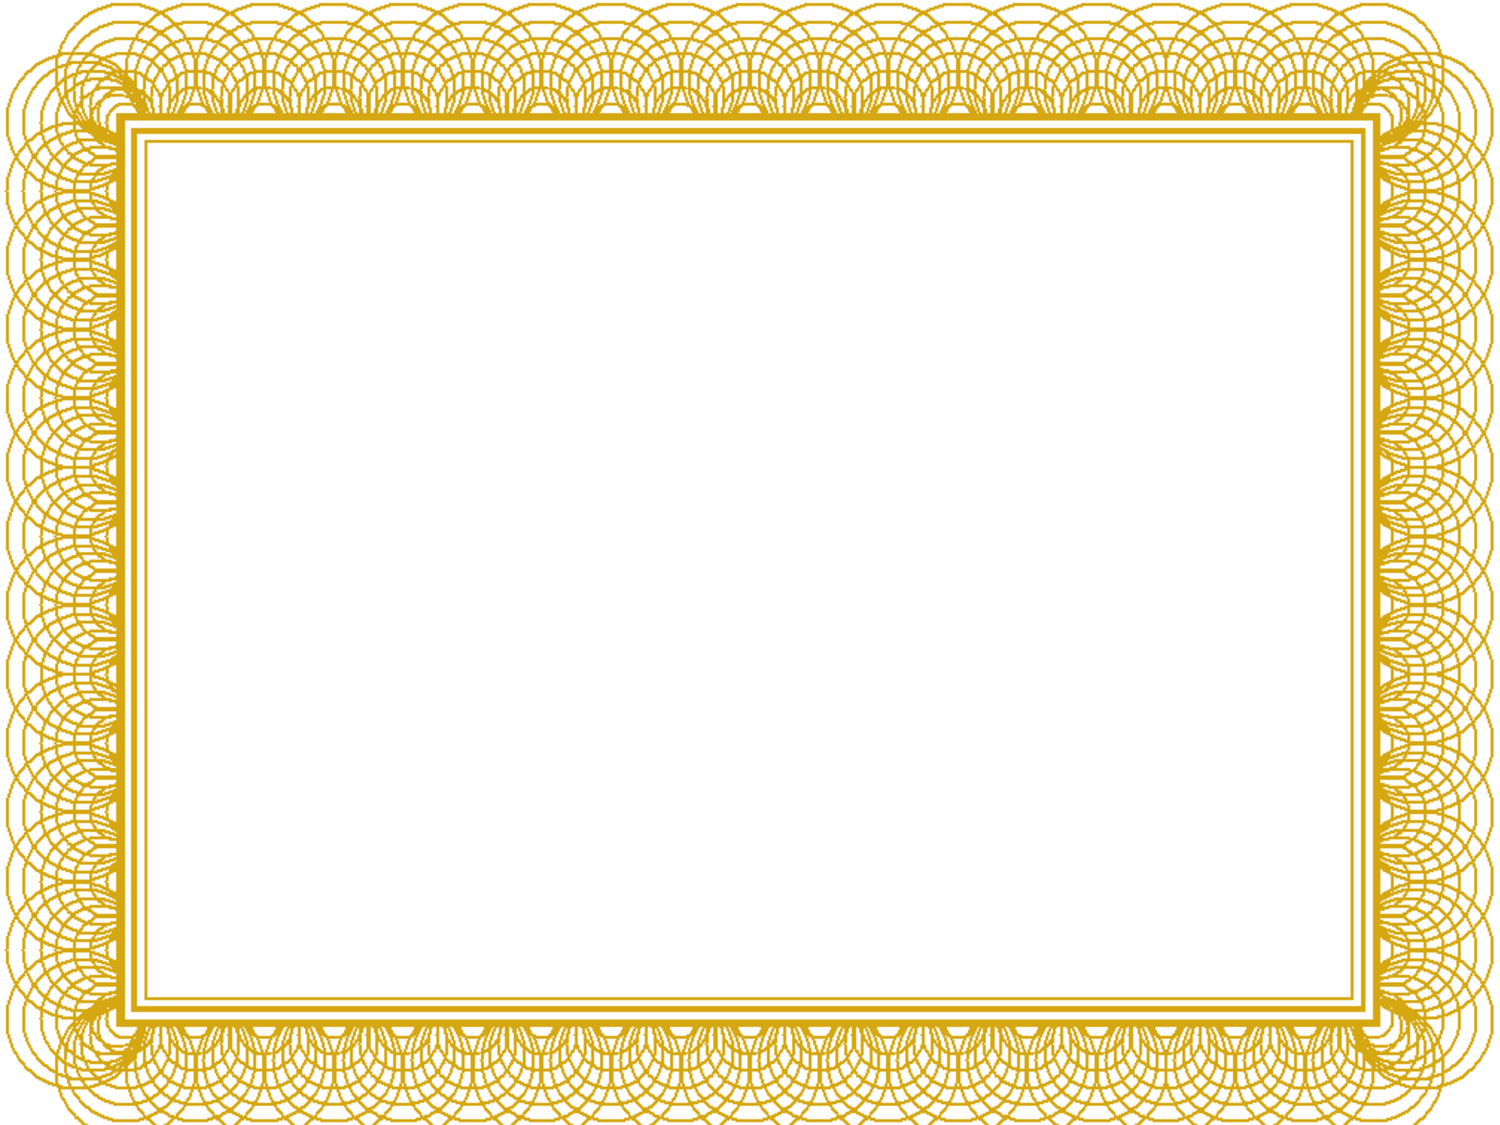 Free Printable Blank Certificate Borders Gold - Certificates, Transparent background PNG HD thumbnail